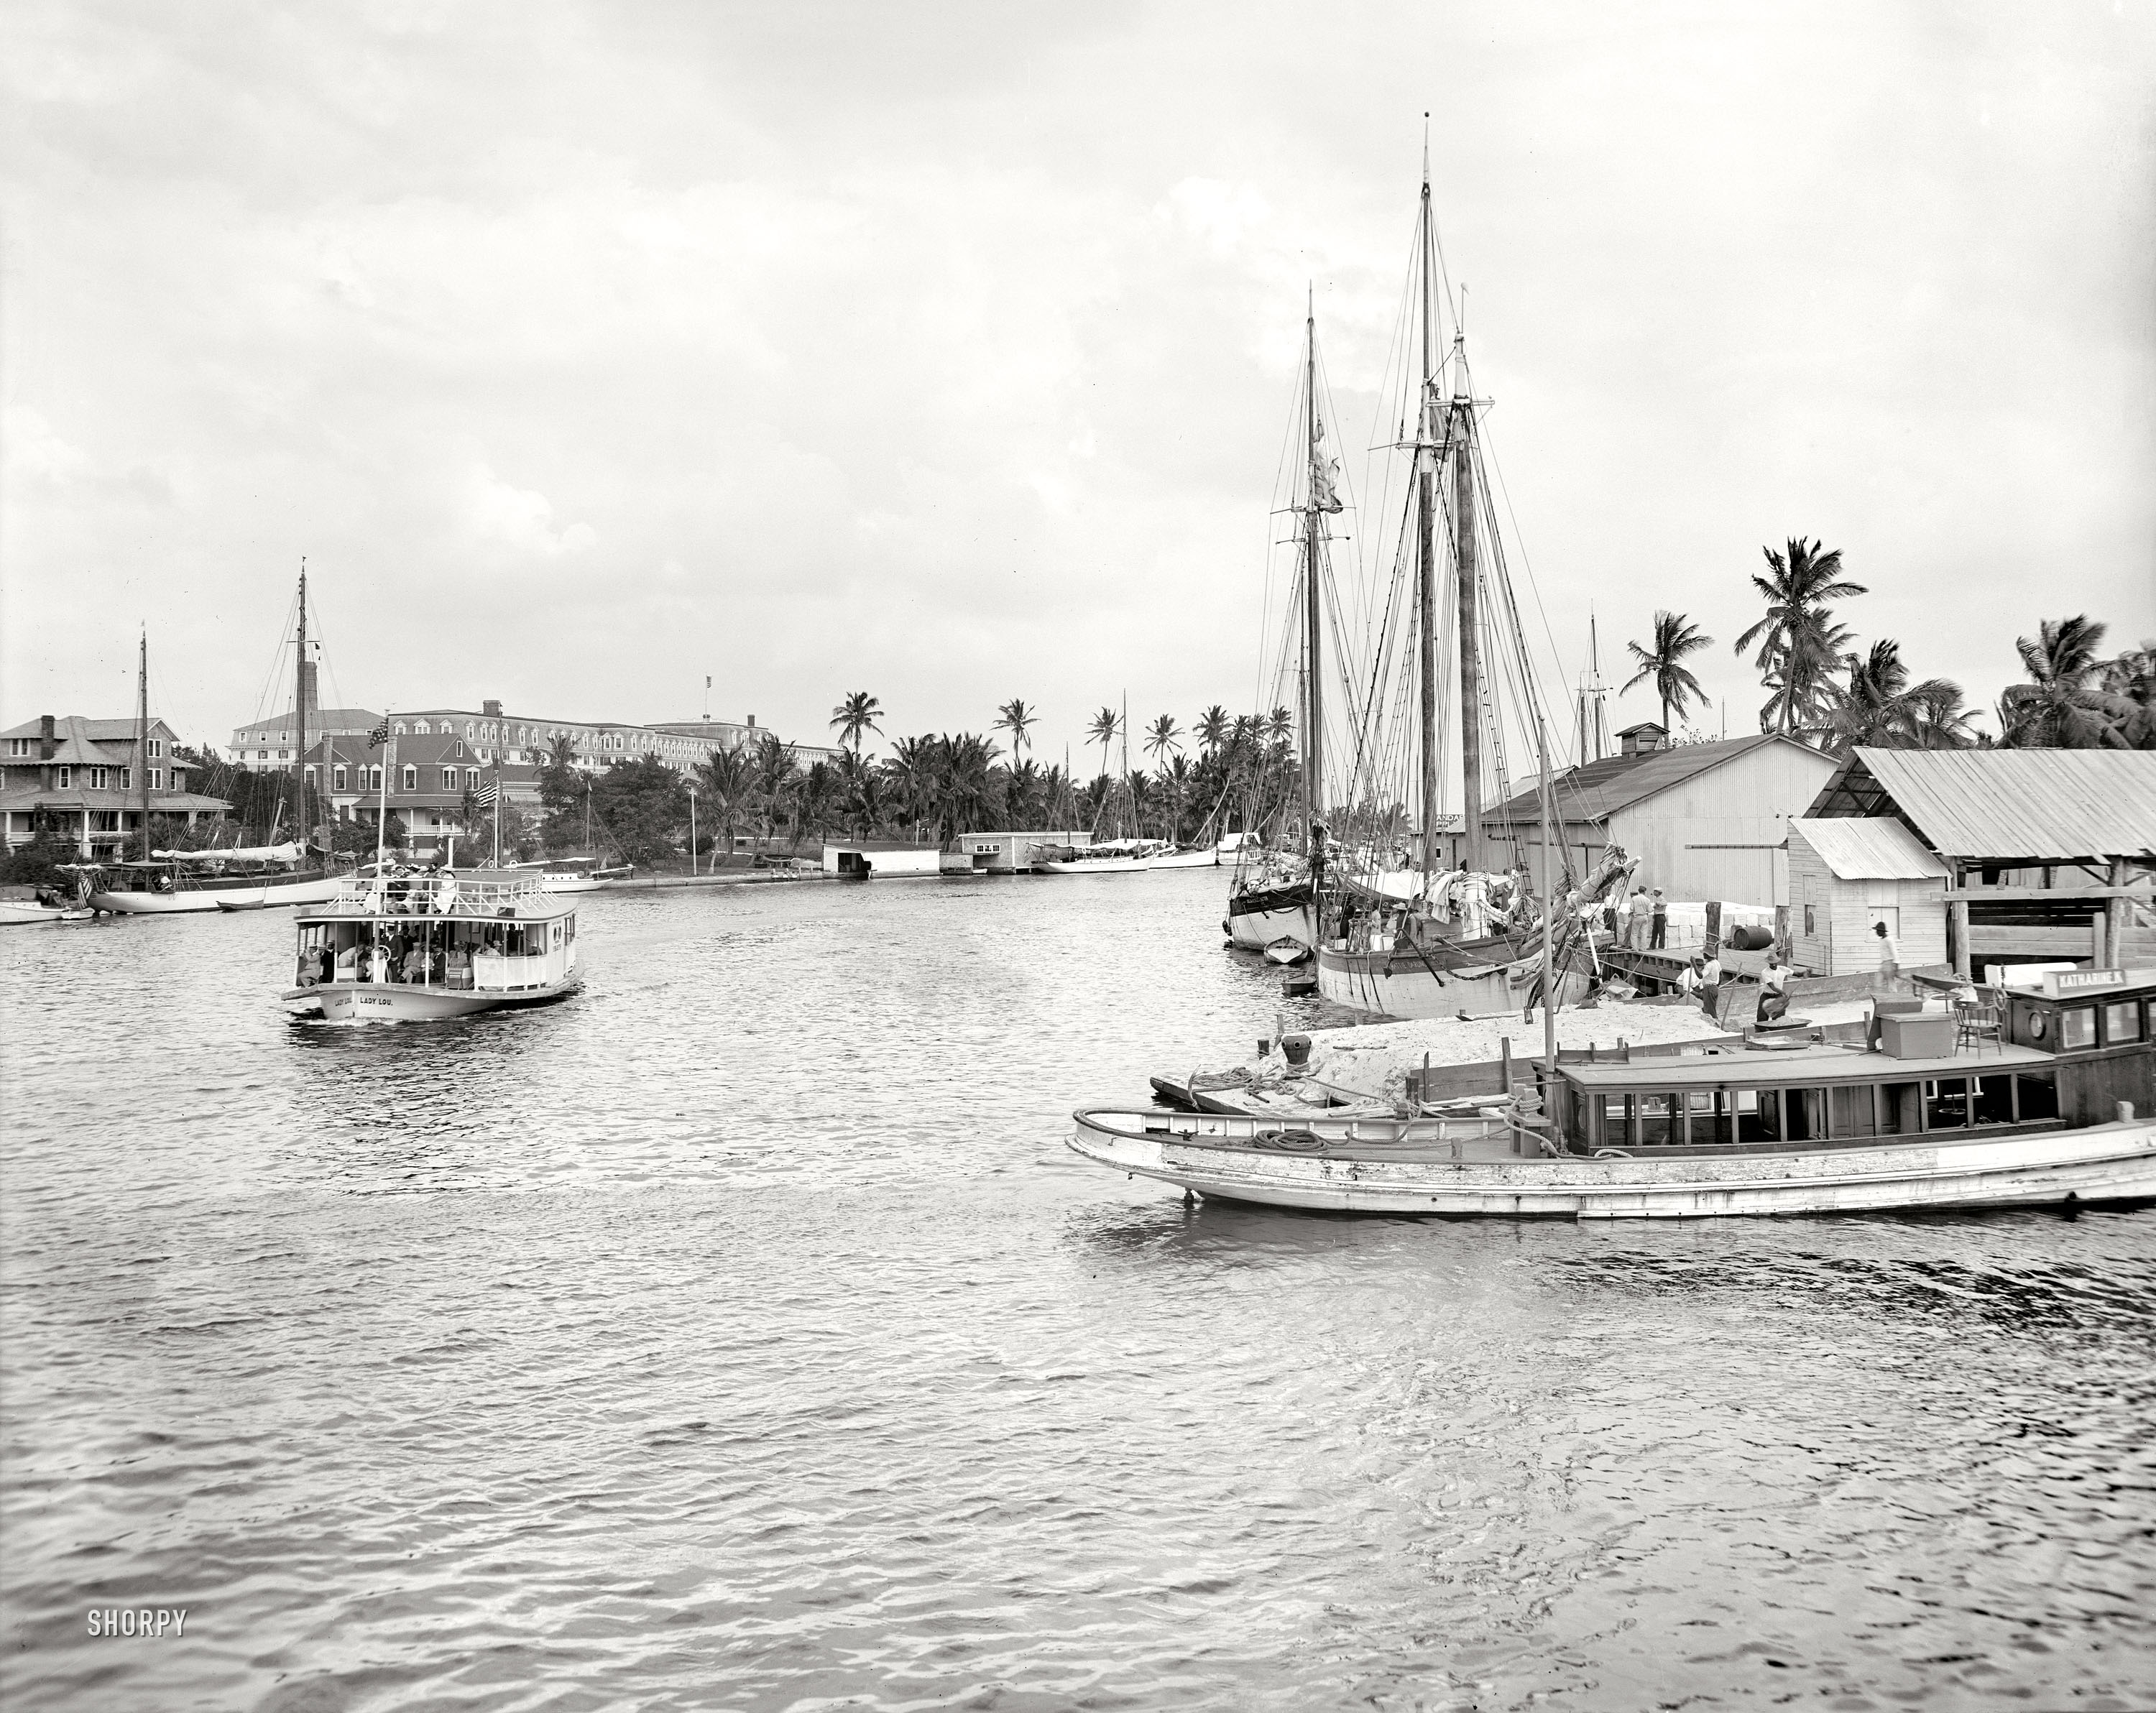 Miami circa 1907. "Miami River and Royal Palm Hotel." Yet another Florida hotel built by Henry Flagler, the Royal Palm is said to have had Miami's first electric lights, elevators and swimming pool. 8x10 glass negative. View full size.